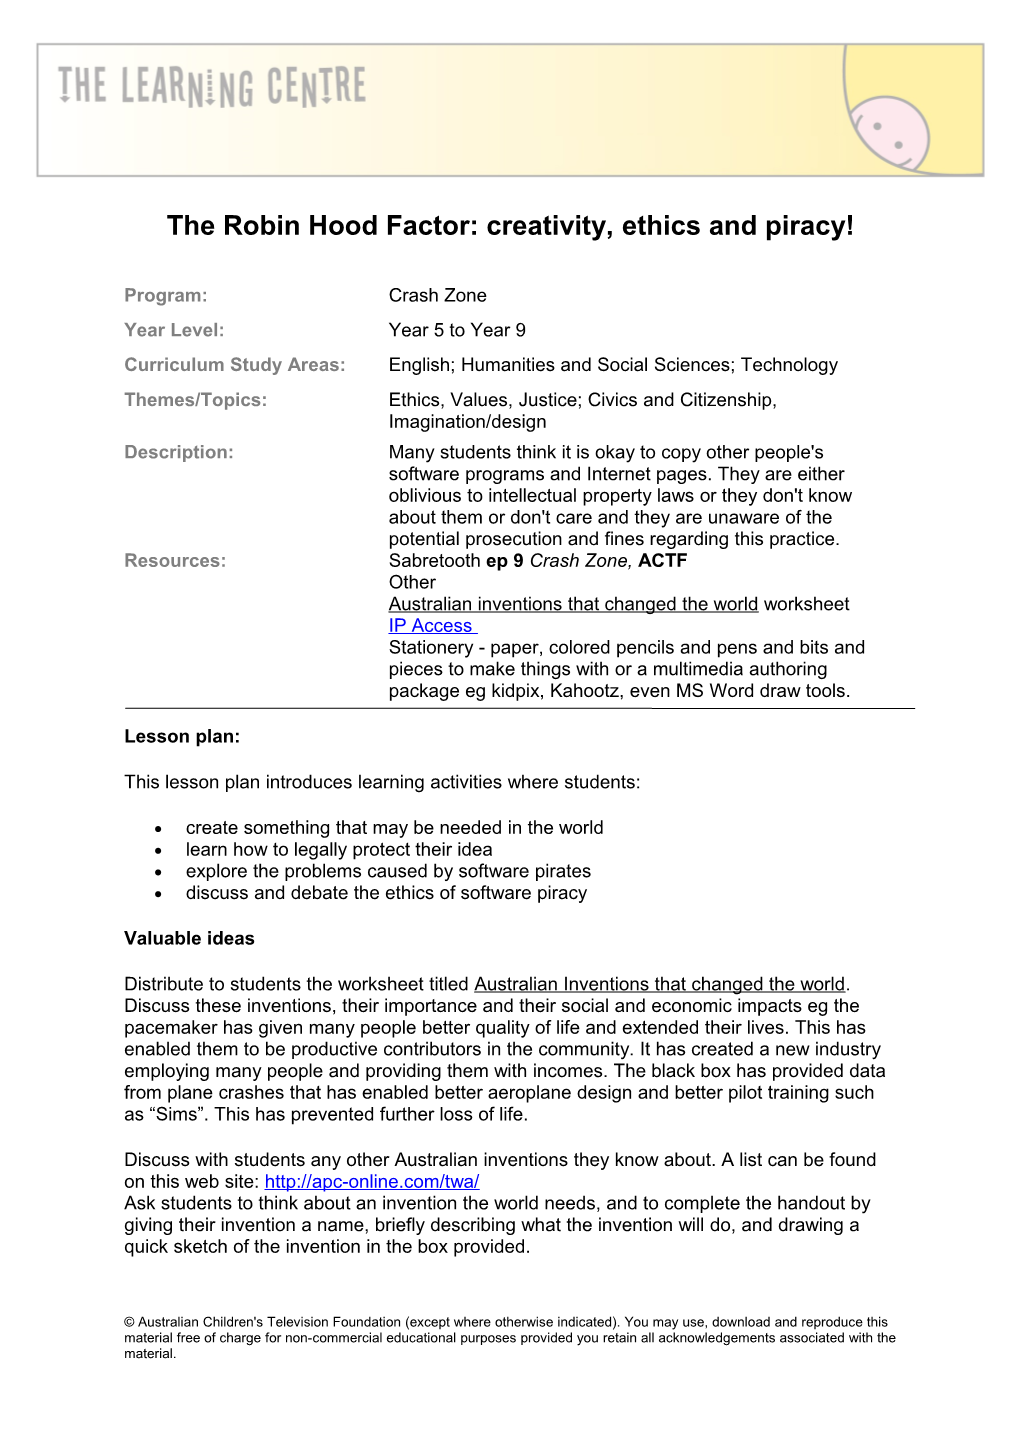 The Robin Hood Factor: Creativity, Ethics and Piracy!